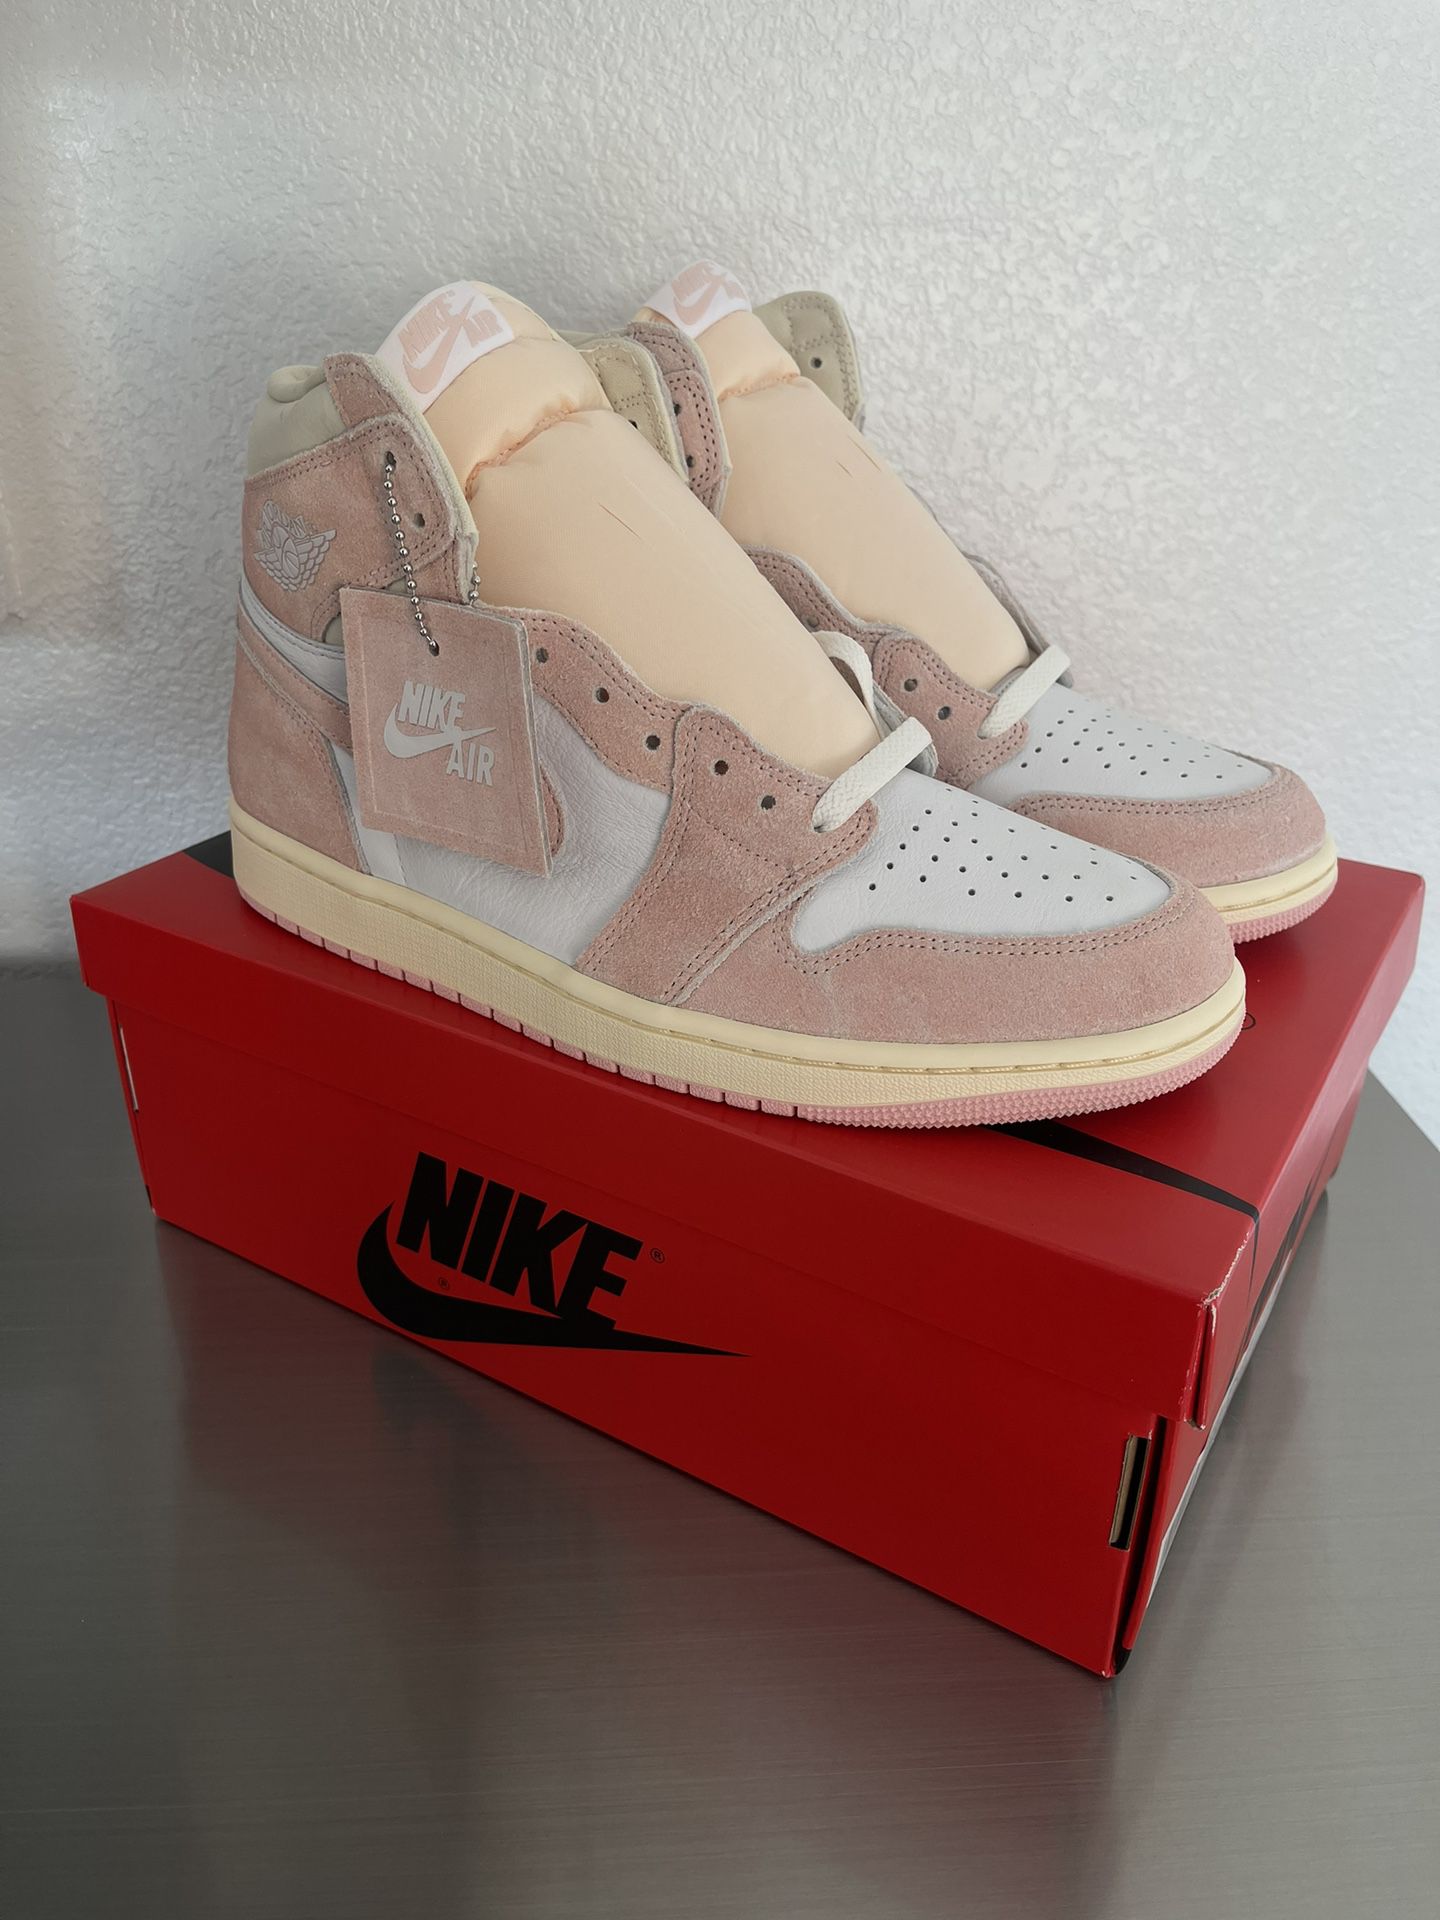 Jordan 1 High Washed Pink Size 10.5M/ 12W DS